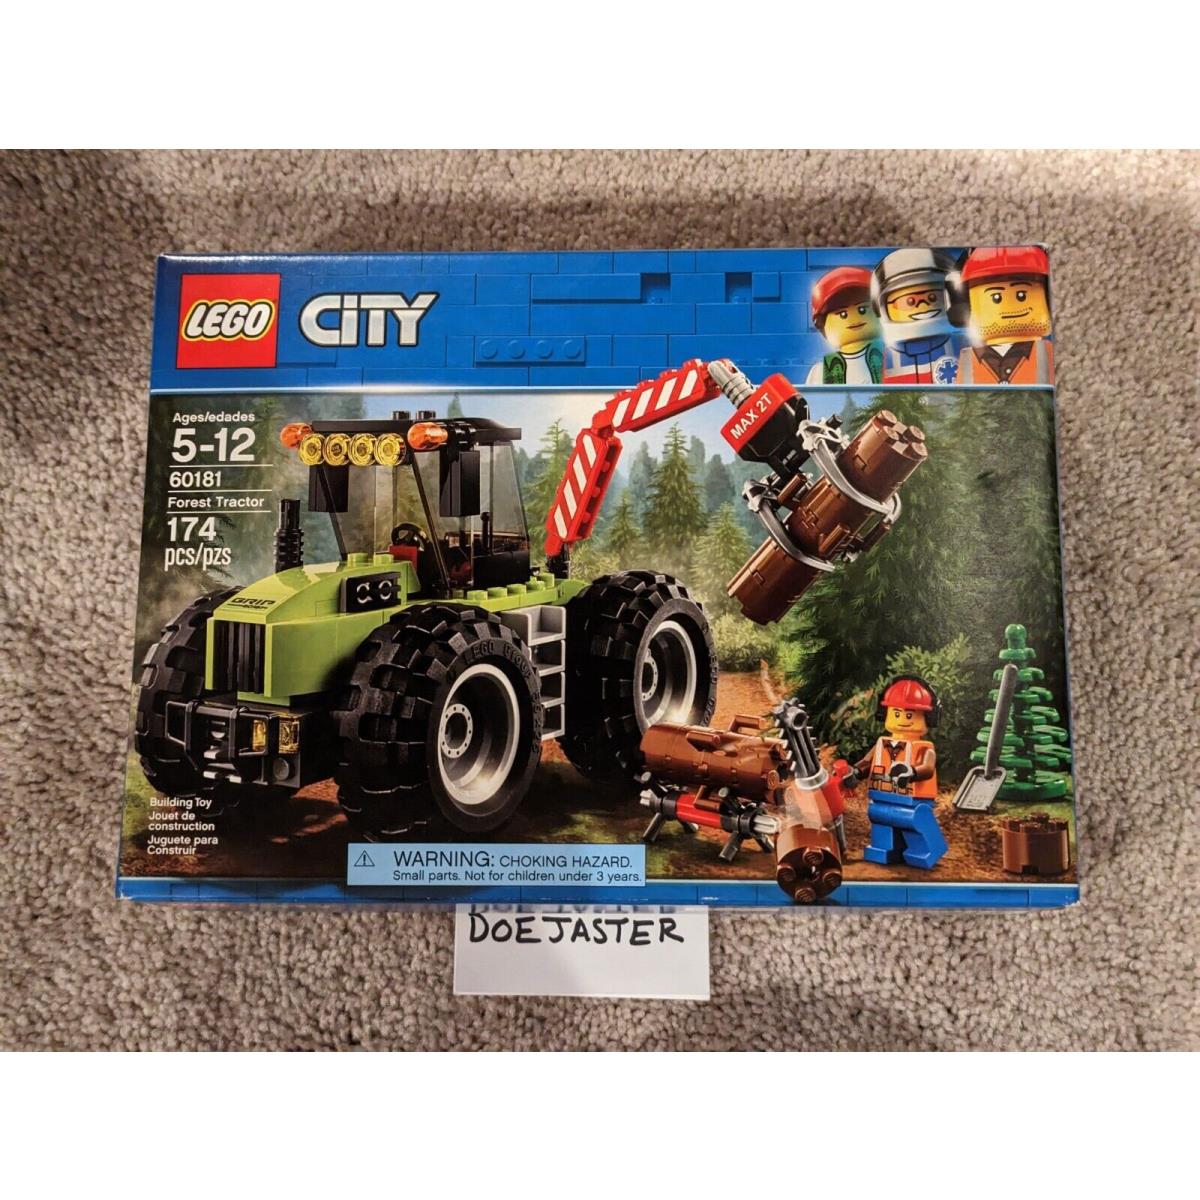 Lego City Forest Tractor 60181 - Great Vehicles - 2018